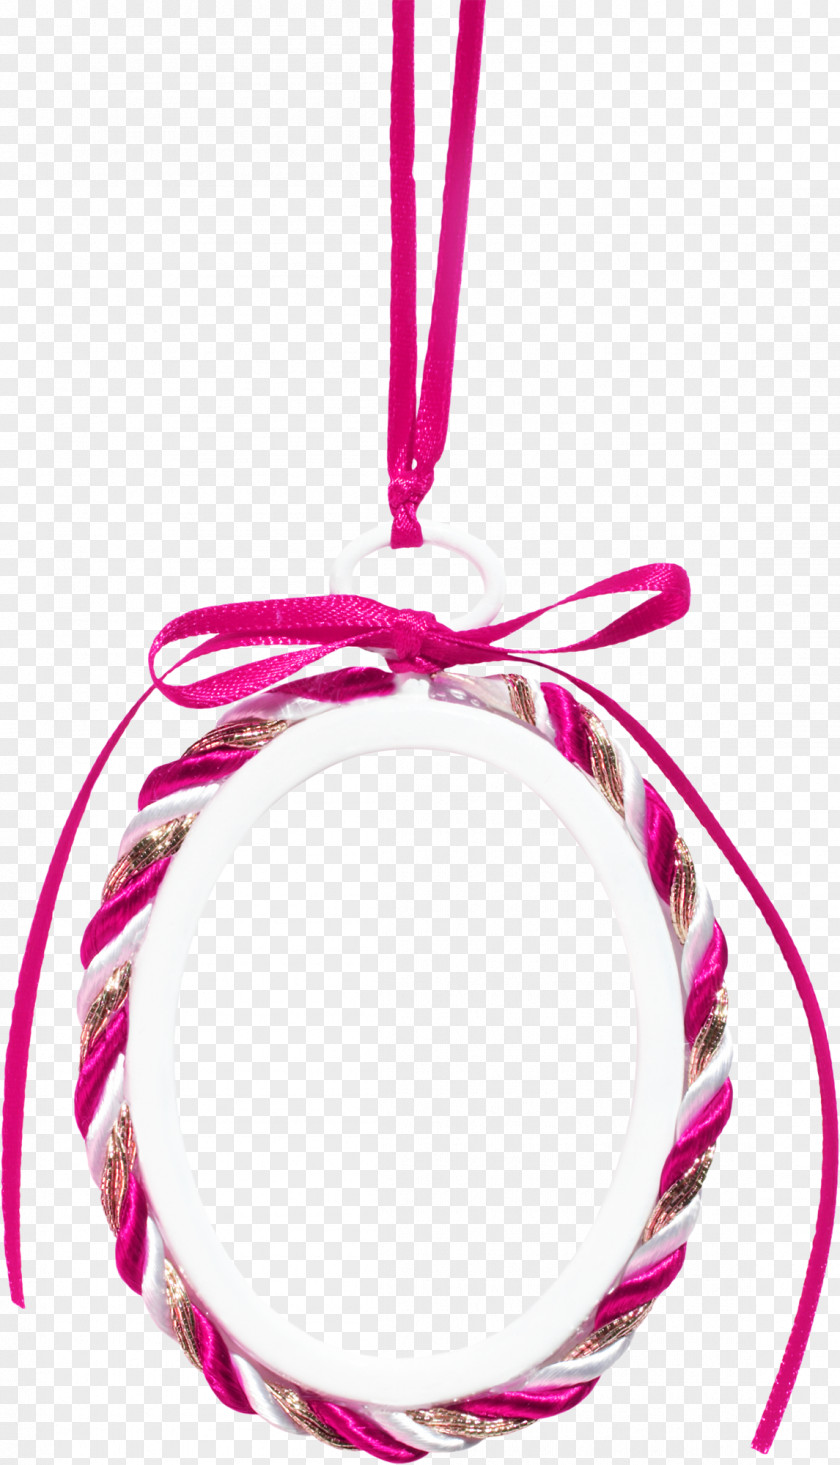 Red Ribbon Ring PNG